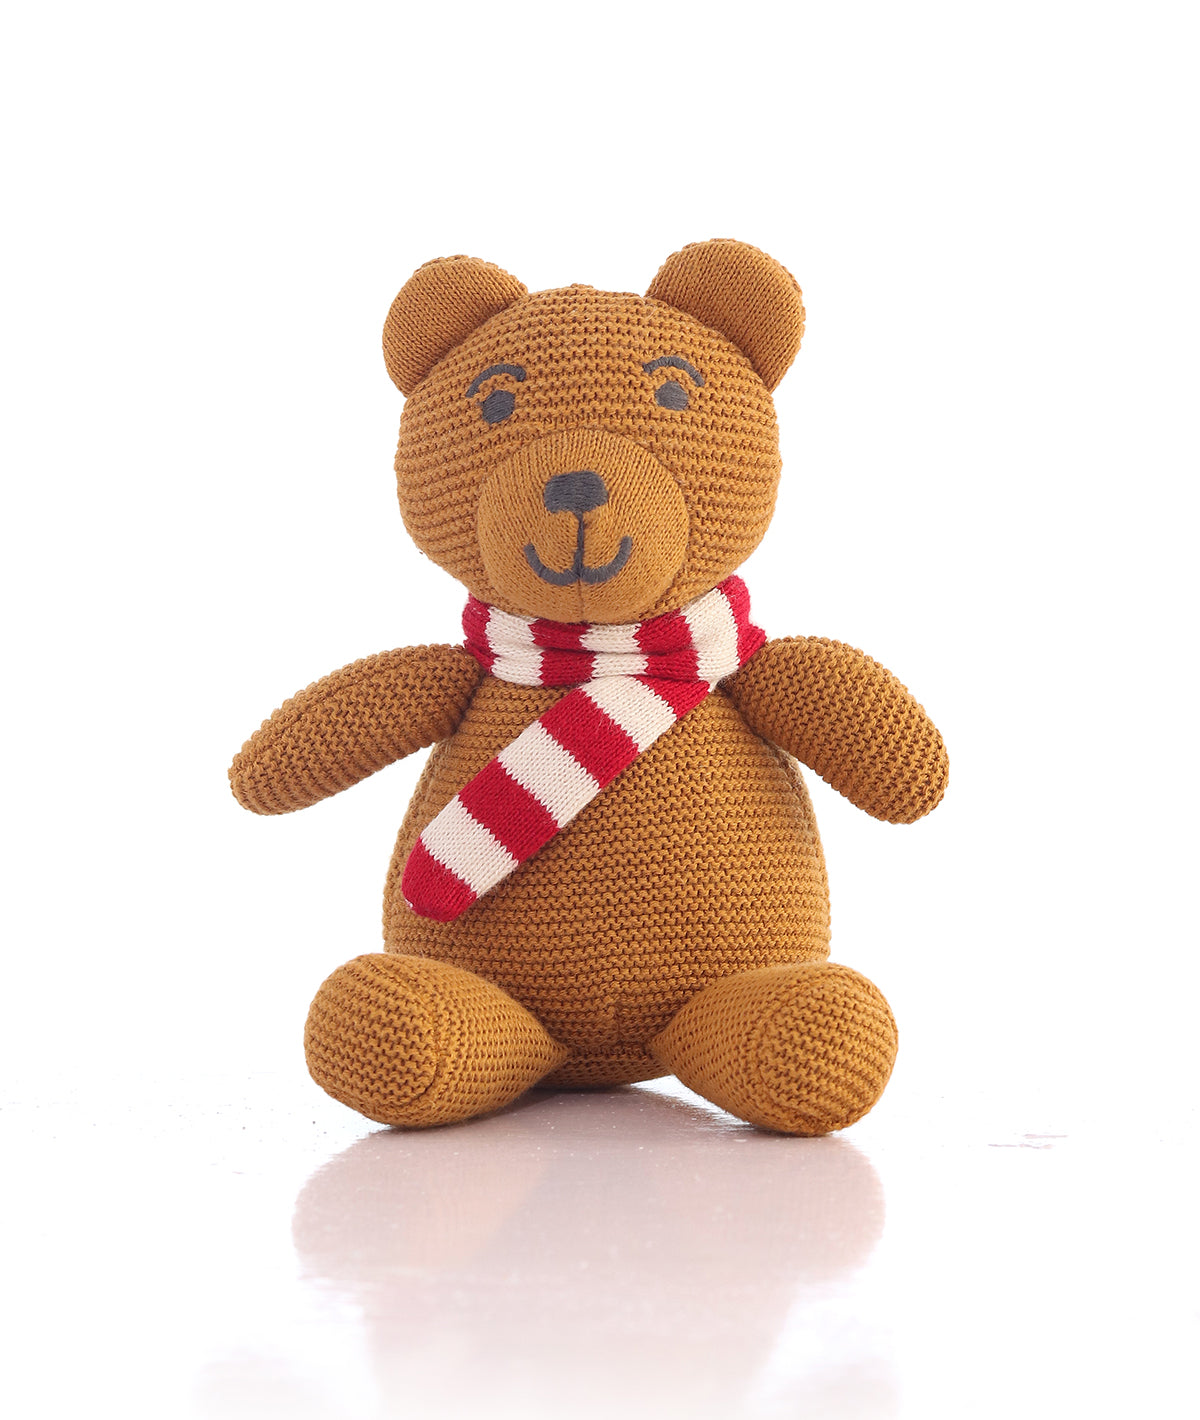 Baby Bear with Scarf Cotton Knitted Stuffed Soft Toy for Babies & Kids (Mustard, Red & Natural)